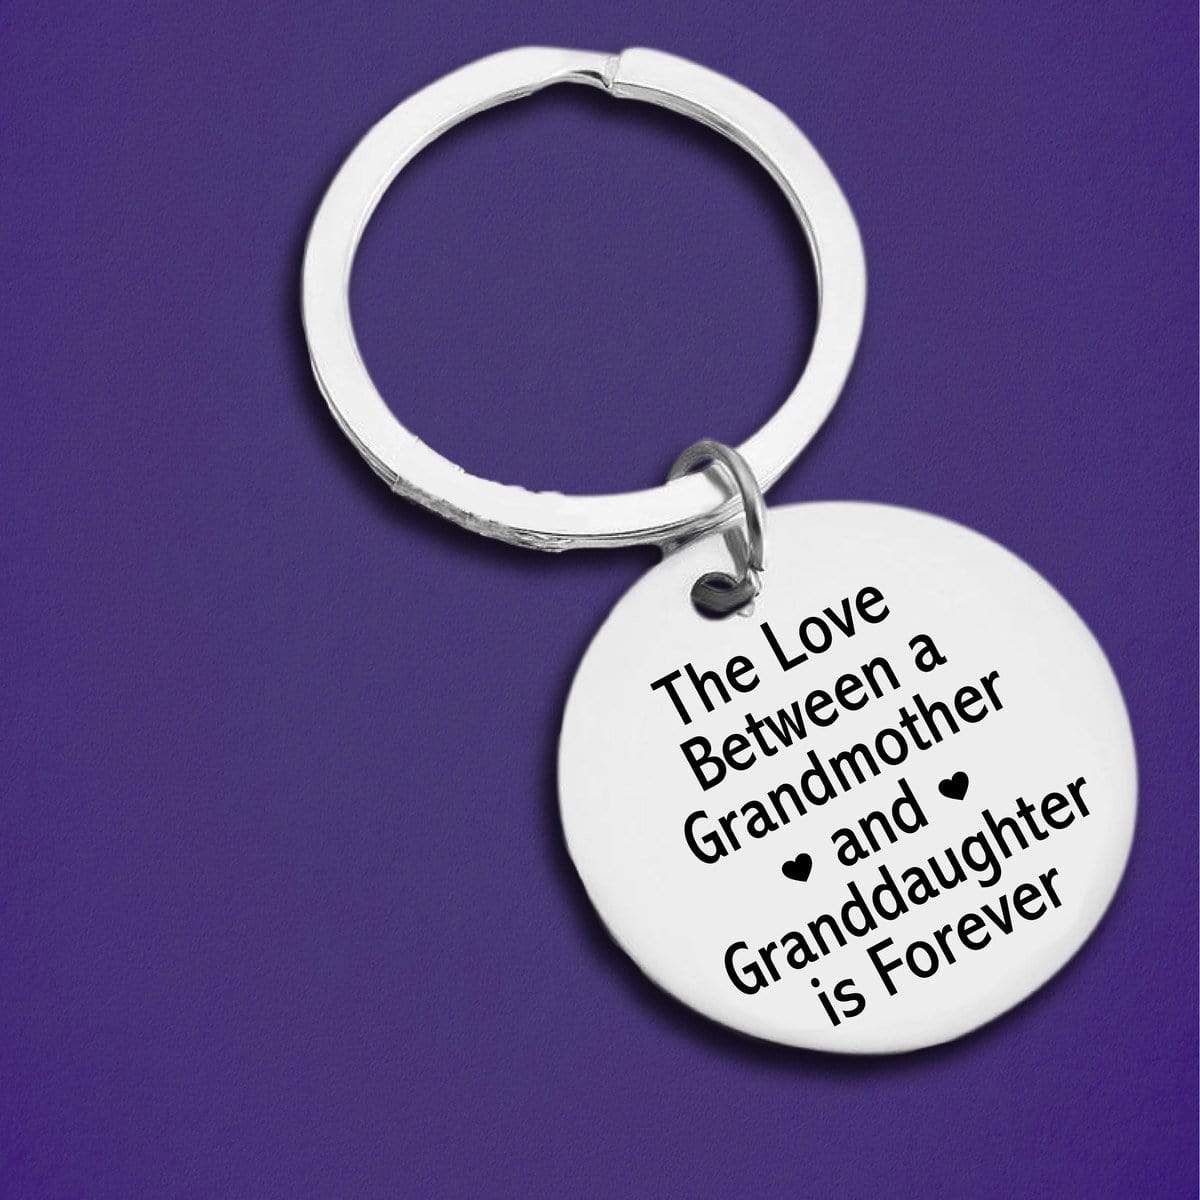 The Love Between A Grandmother & Granddaughter Is Forever Keychain Keychain MelodyNecklace